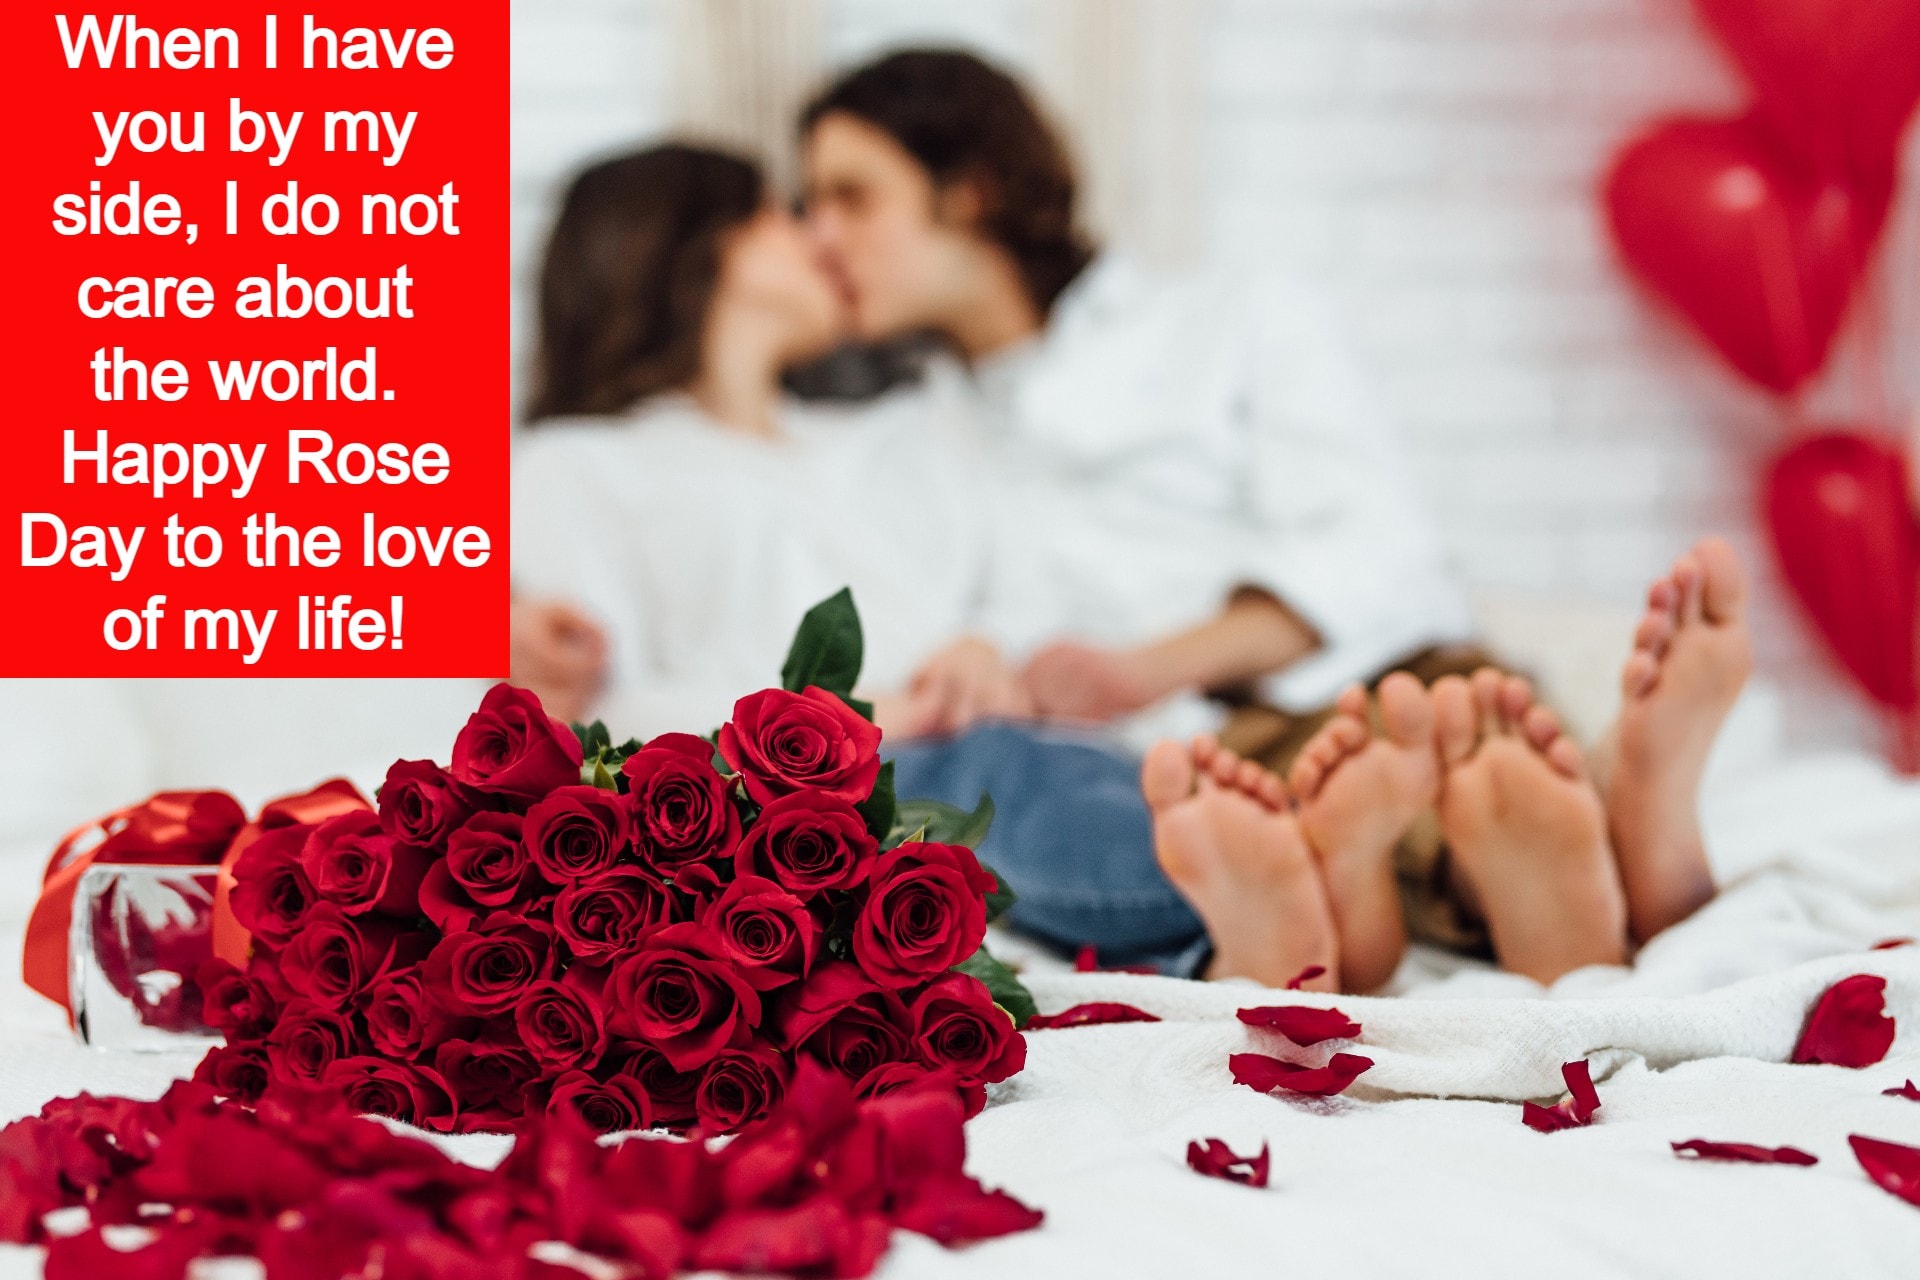 Happy Rose Day 2022: Wishes Images, Quotes, Status, HD Wallpapers, GIF Pics,  Greetings Card, Messages, Photos